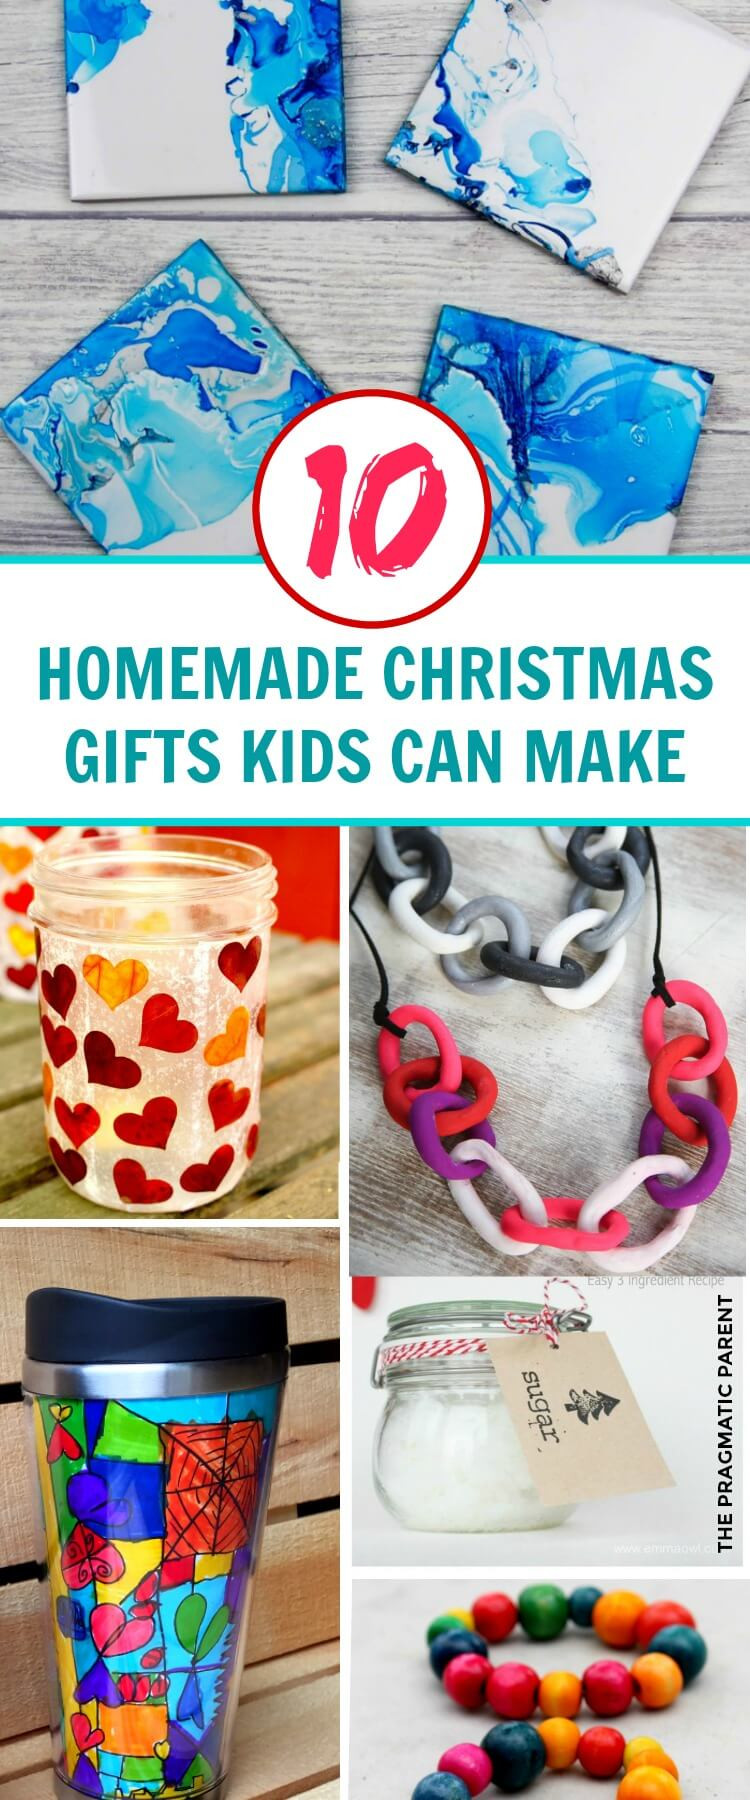 DIY Gifts For Kids To Make
 10 Beautiful Homemade Christmas Gifts Kids Can Make This 2020